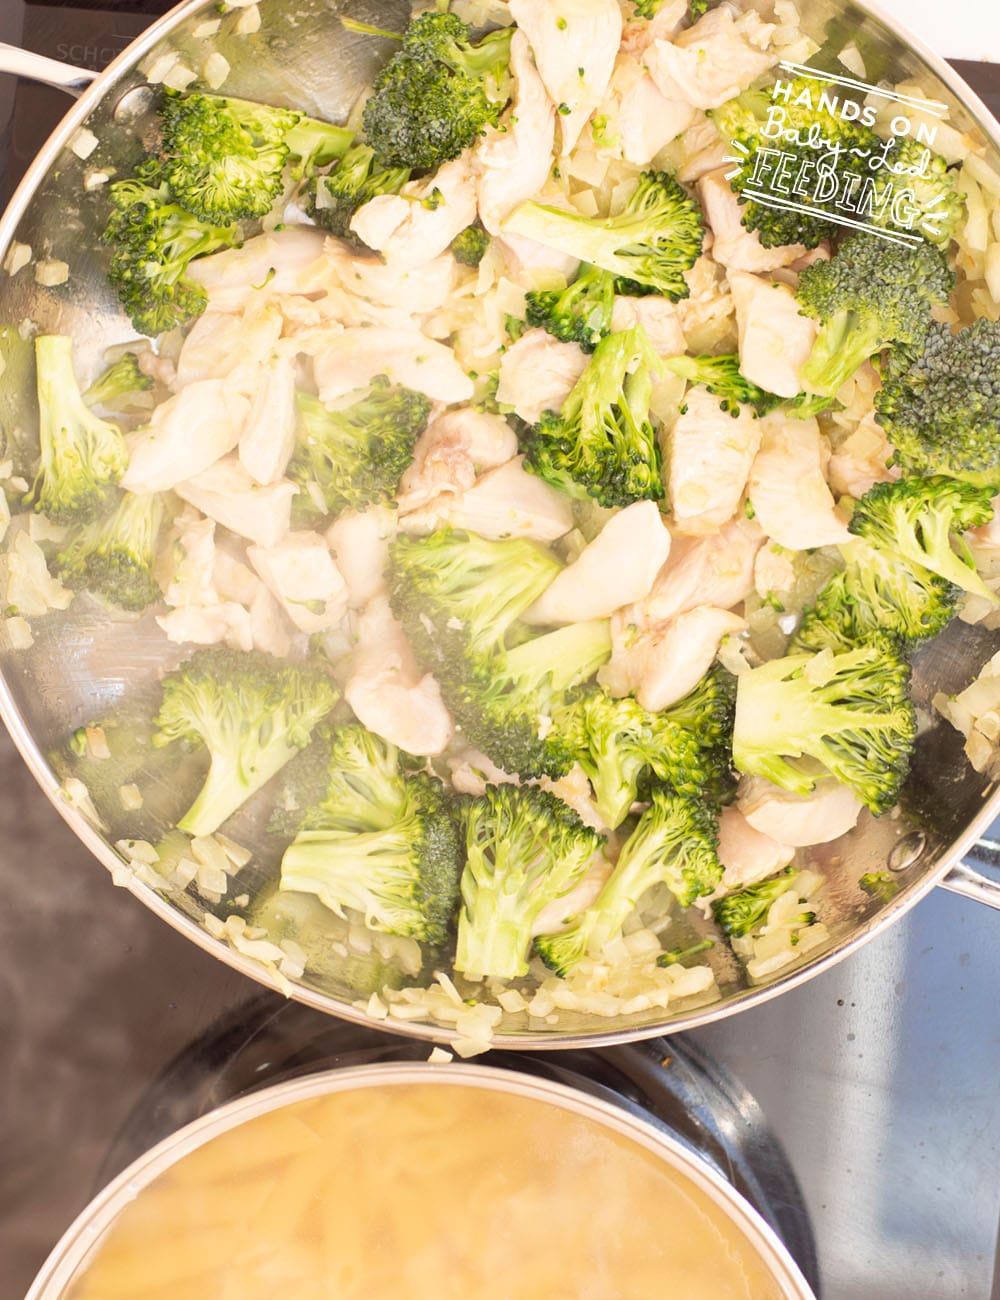 Chicken and Broccoli Pasta Bake Recipe Images5